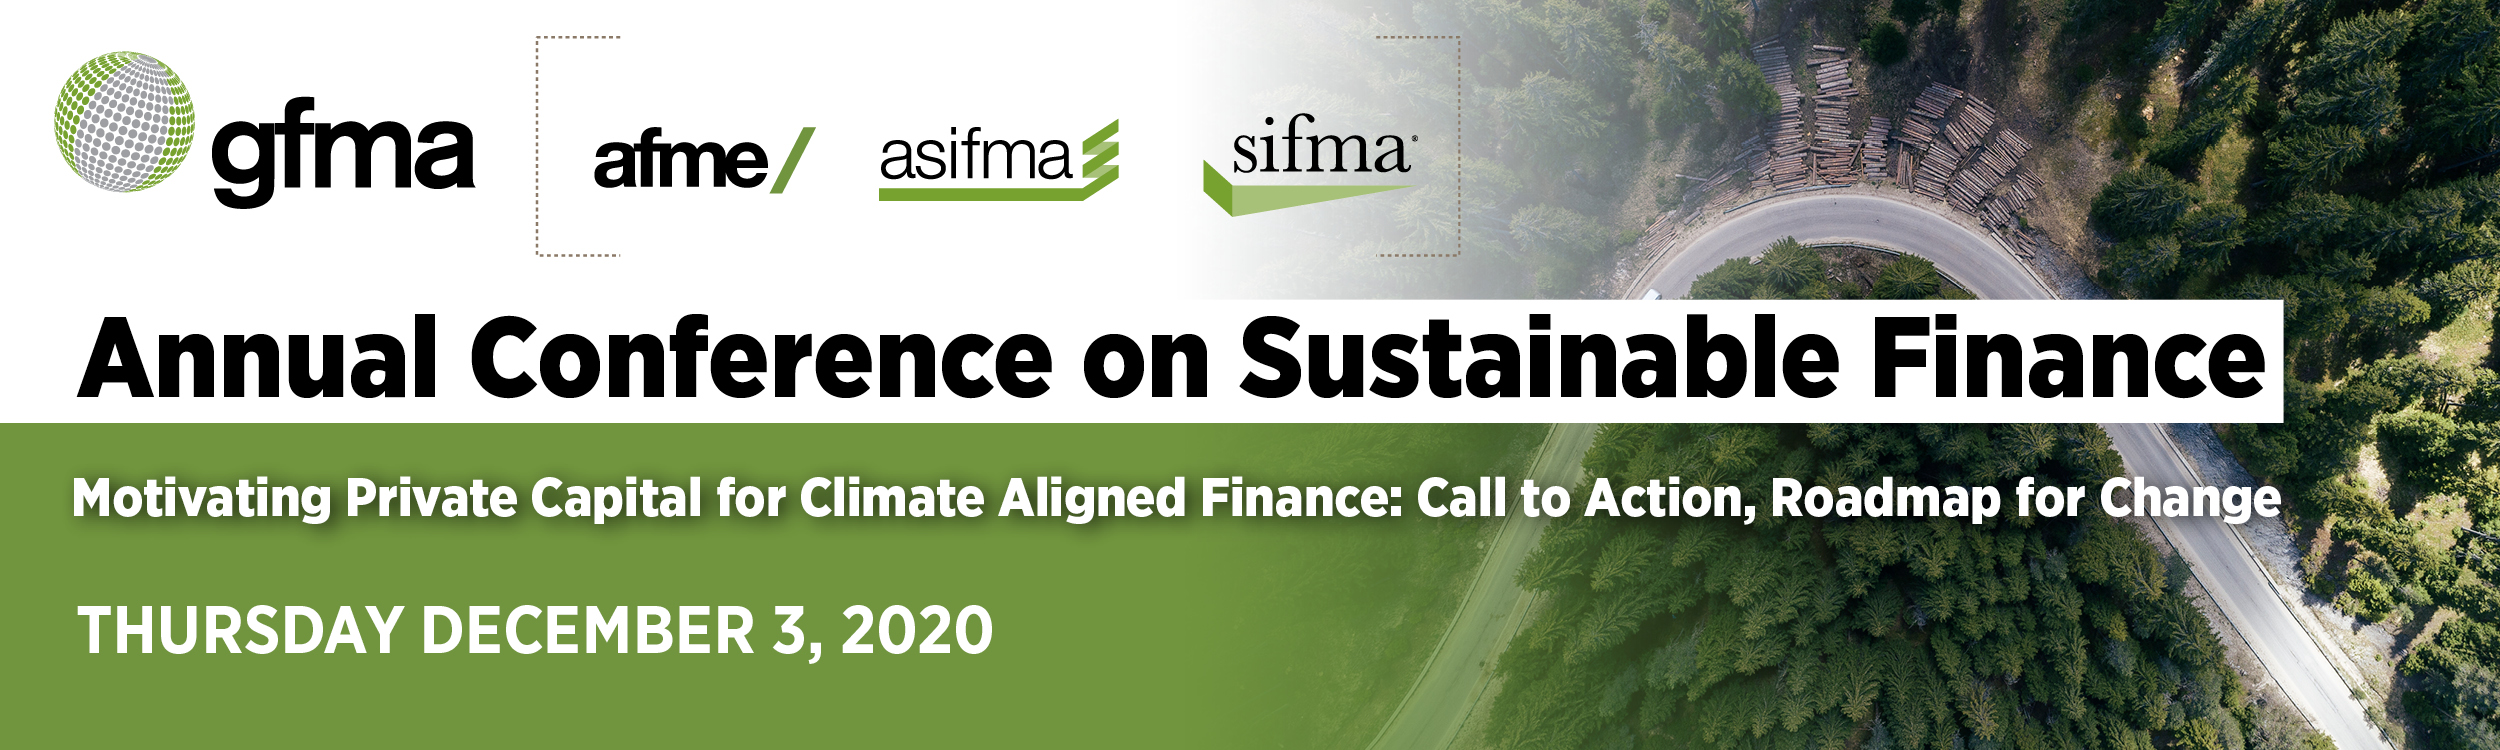 Global Financial Markets Association’s Annual Event on Sustainable Finance